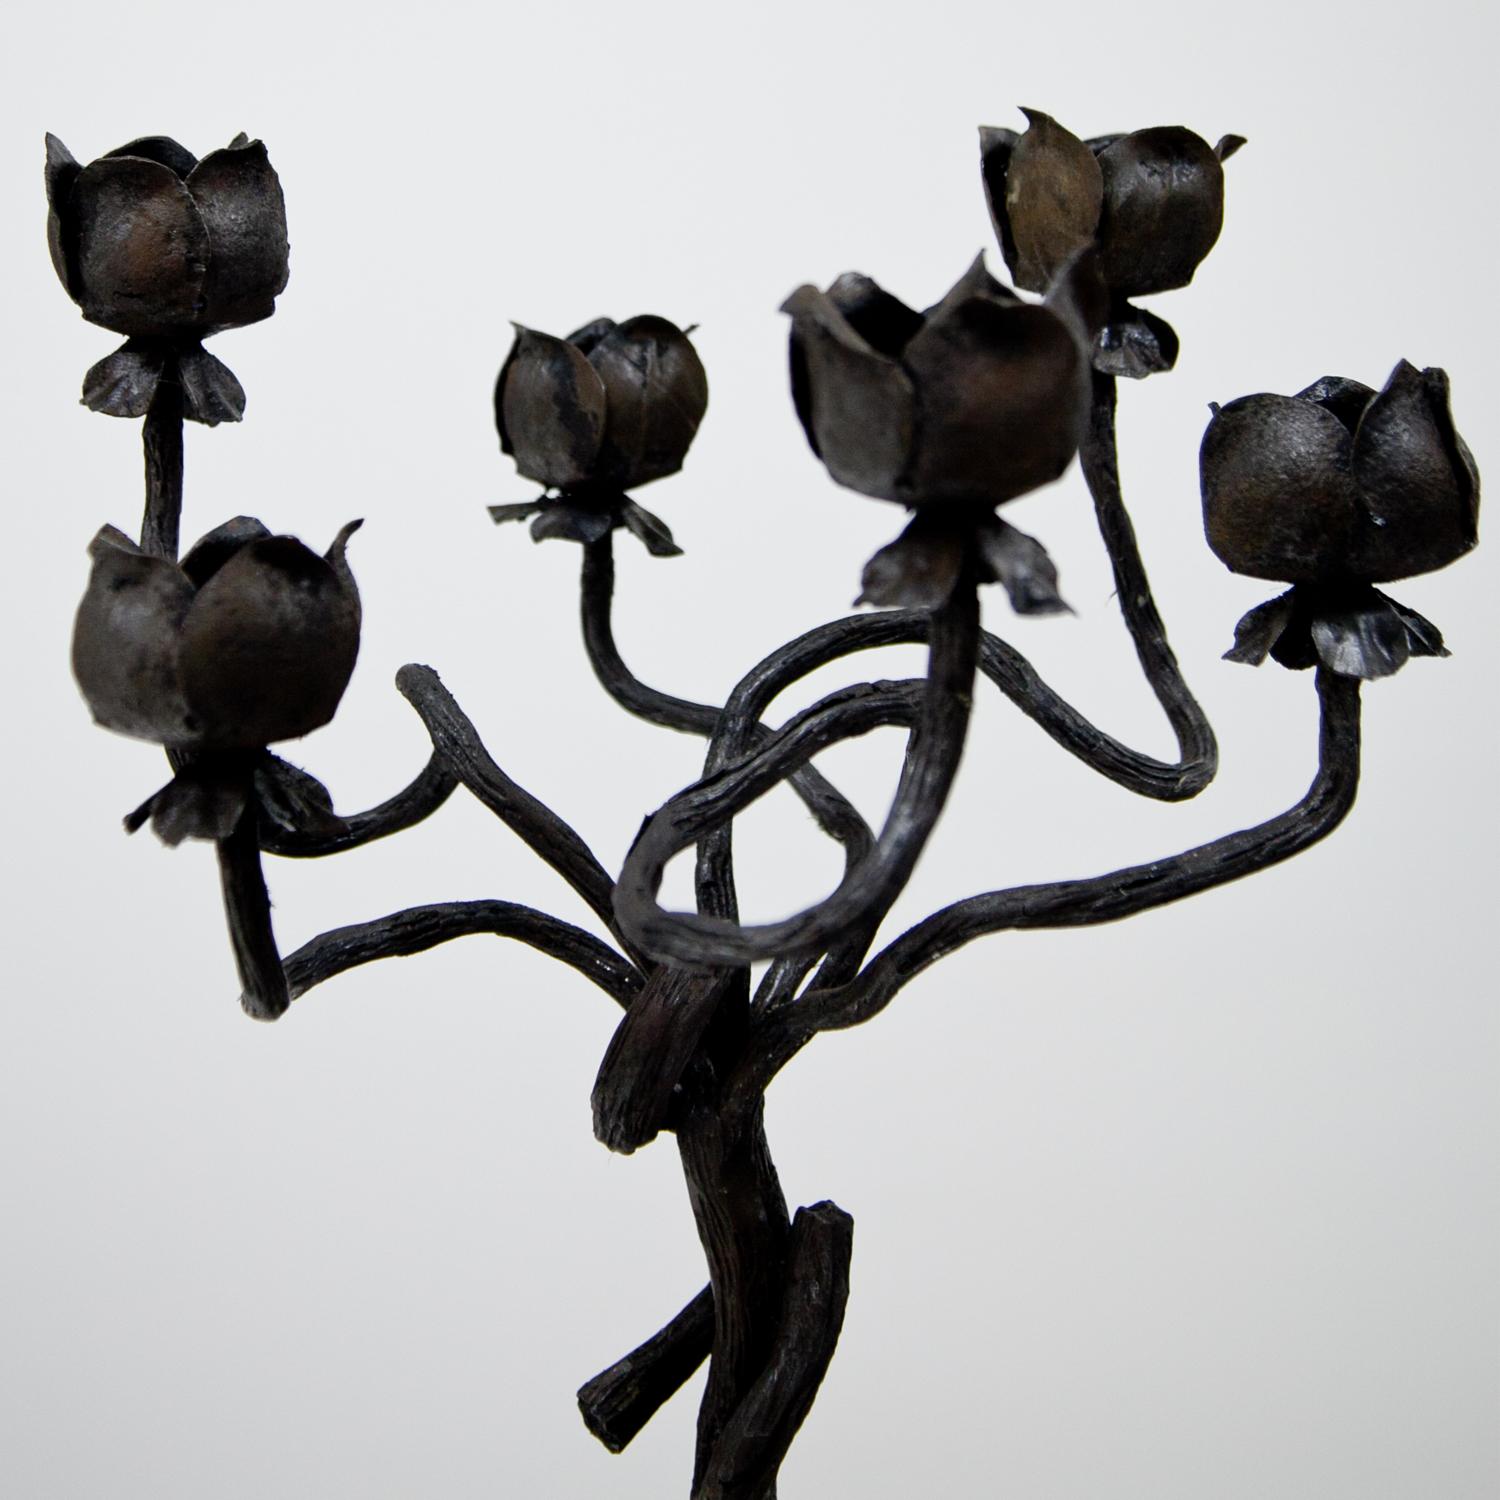 Tall, wrought iron candleholder, attributed to Alessandro Mazzucotelli (1865–1938), first half of the 20th century. The candleholder stands on a trefoil base made out of curled stylized roots and has a turned shaft. The top consists of six branches